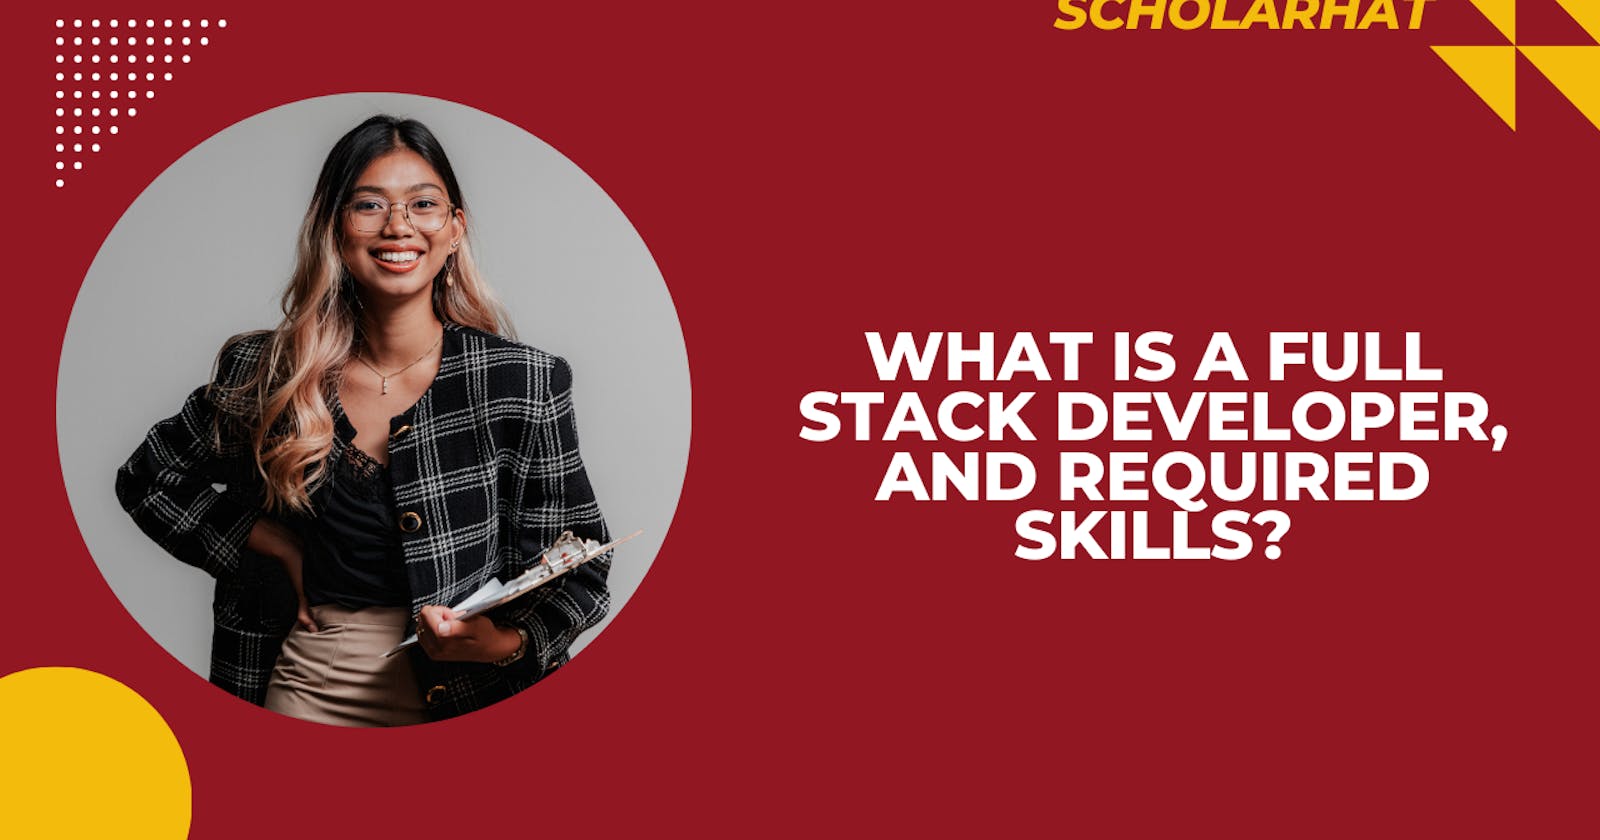 What Is a Full Stack Developer, and Required Skills?